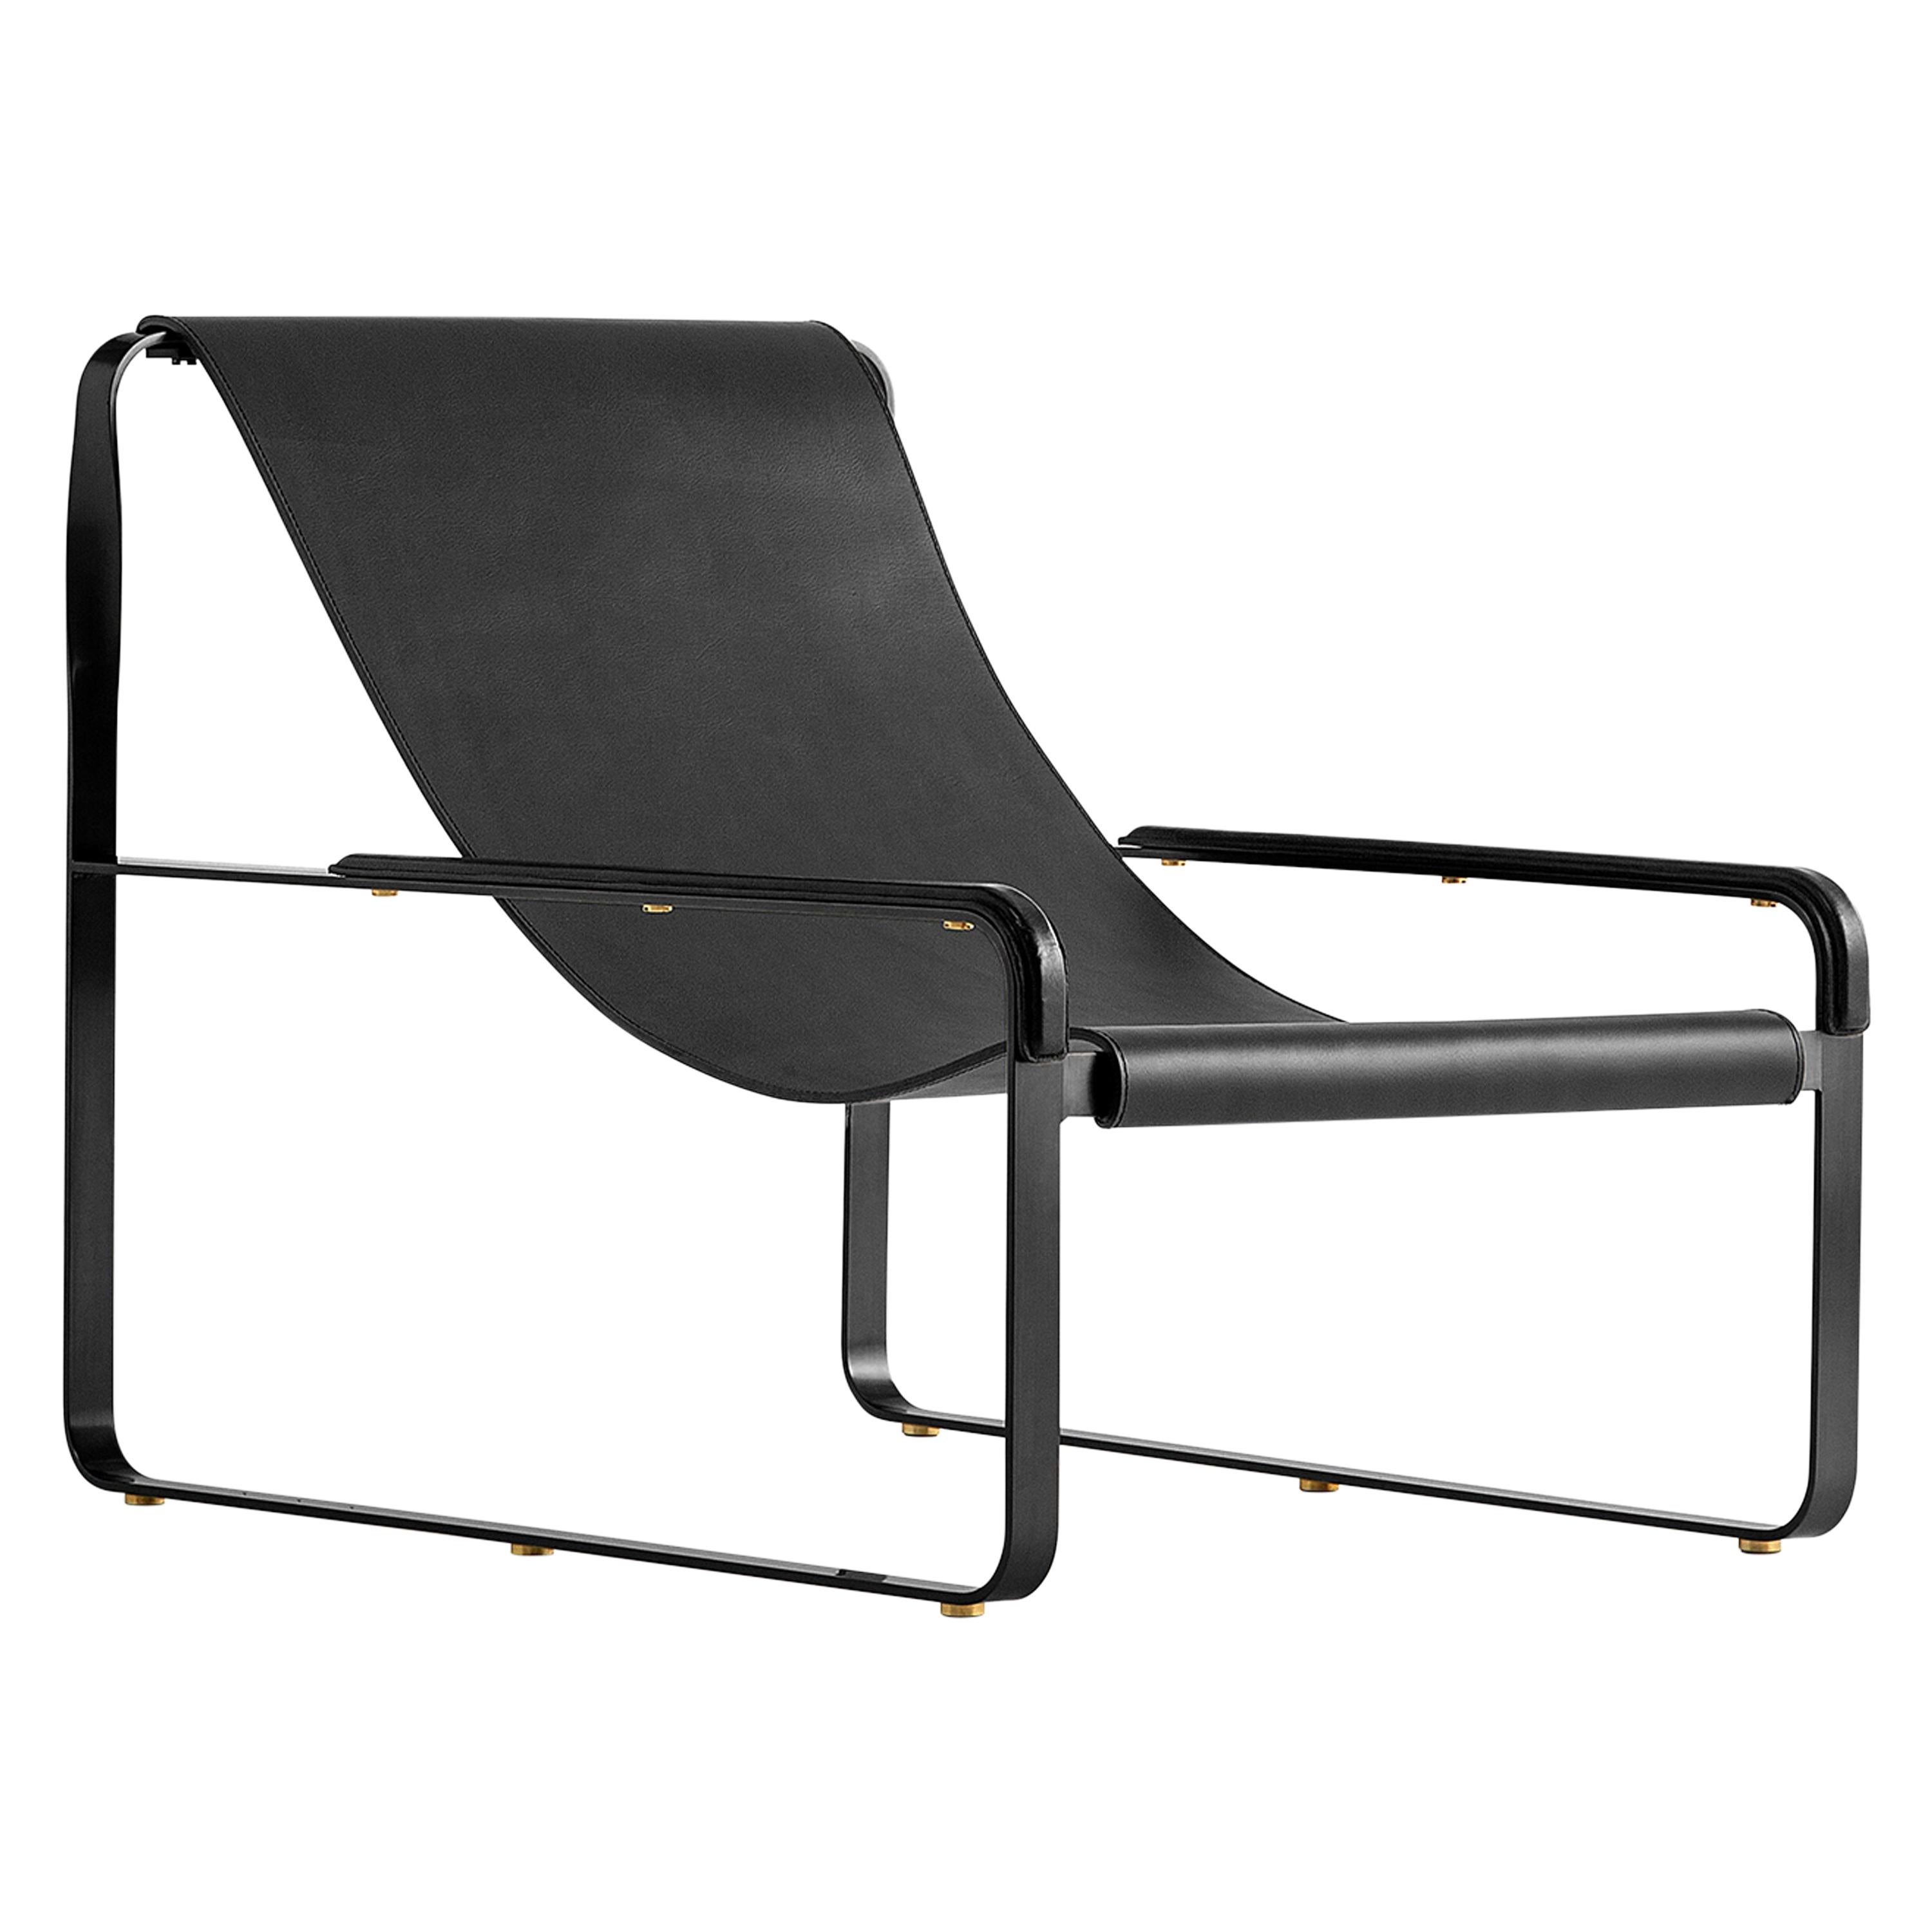 Classic Minimal Contemporary Chaise Lounge Black Smoke Metal & Black Leather